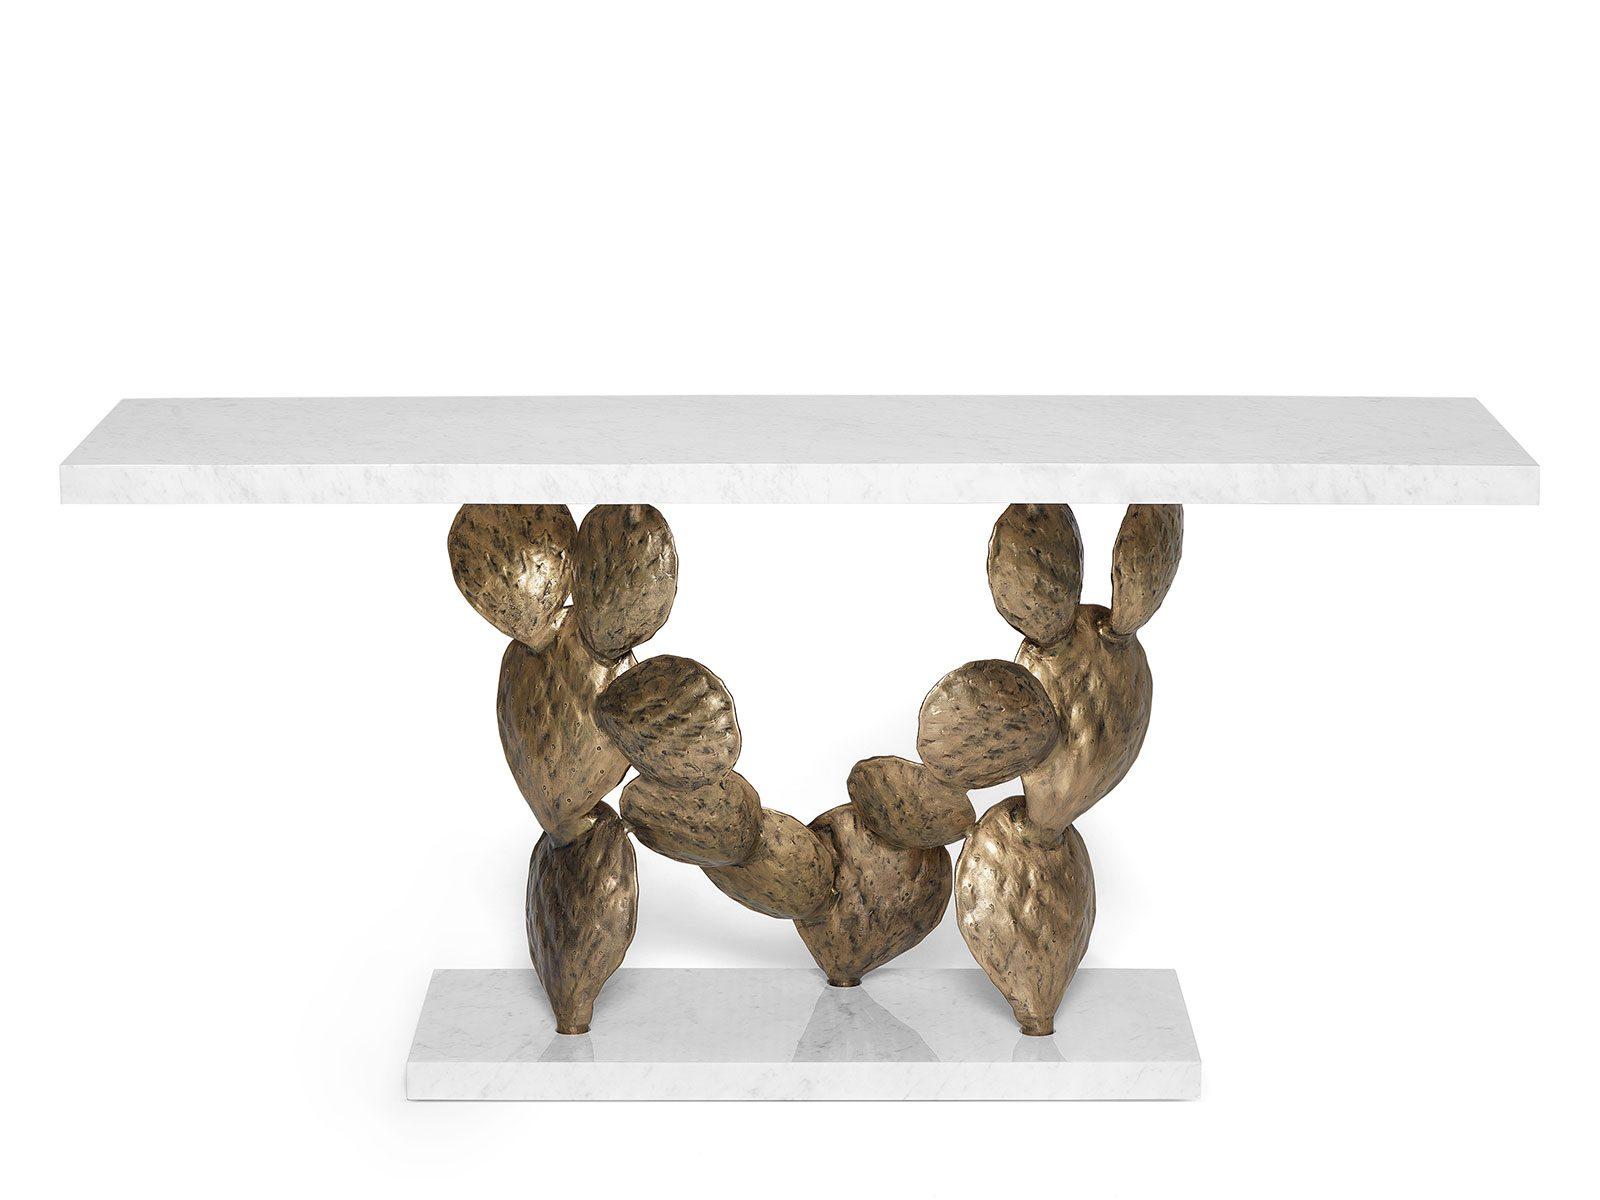 The cactus leaf-shaped structure is cast in solid brass, providing a sense of functionality drawn from nature, while the minimalistic top and base provide a soothing balance with its quiet lines and graceful proportions.
Top and base in Carrara